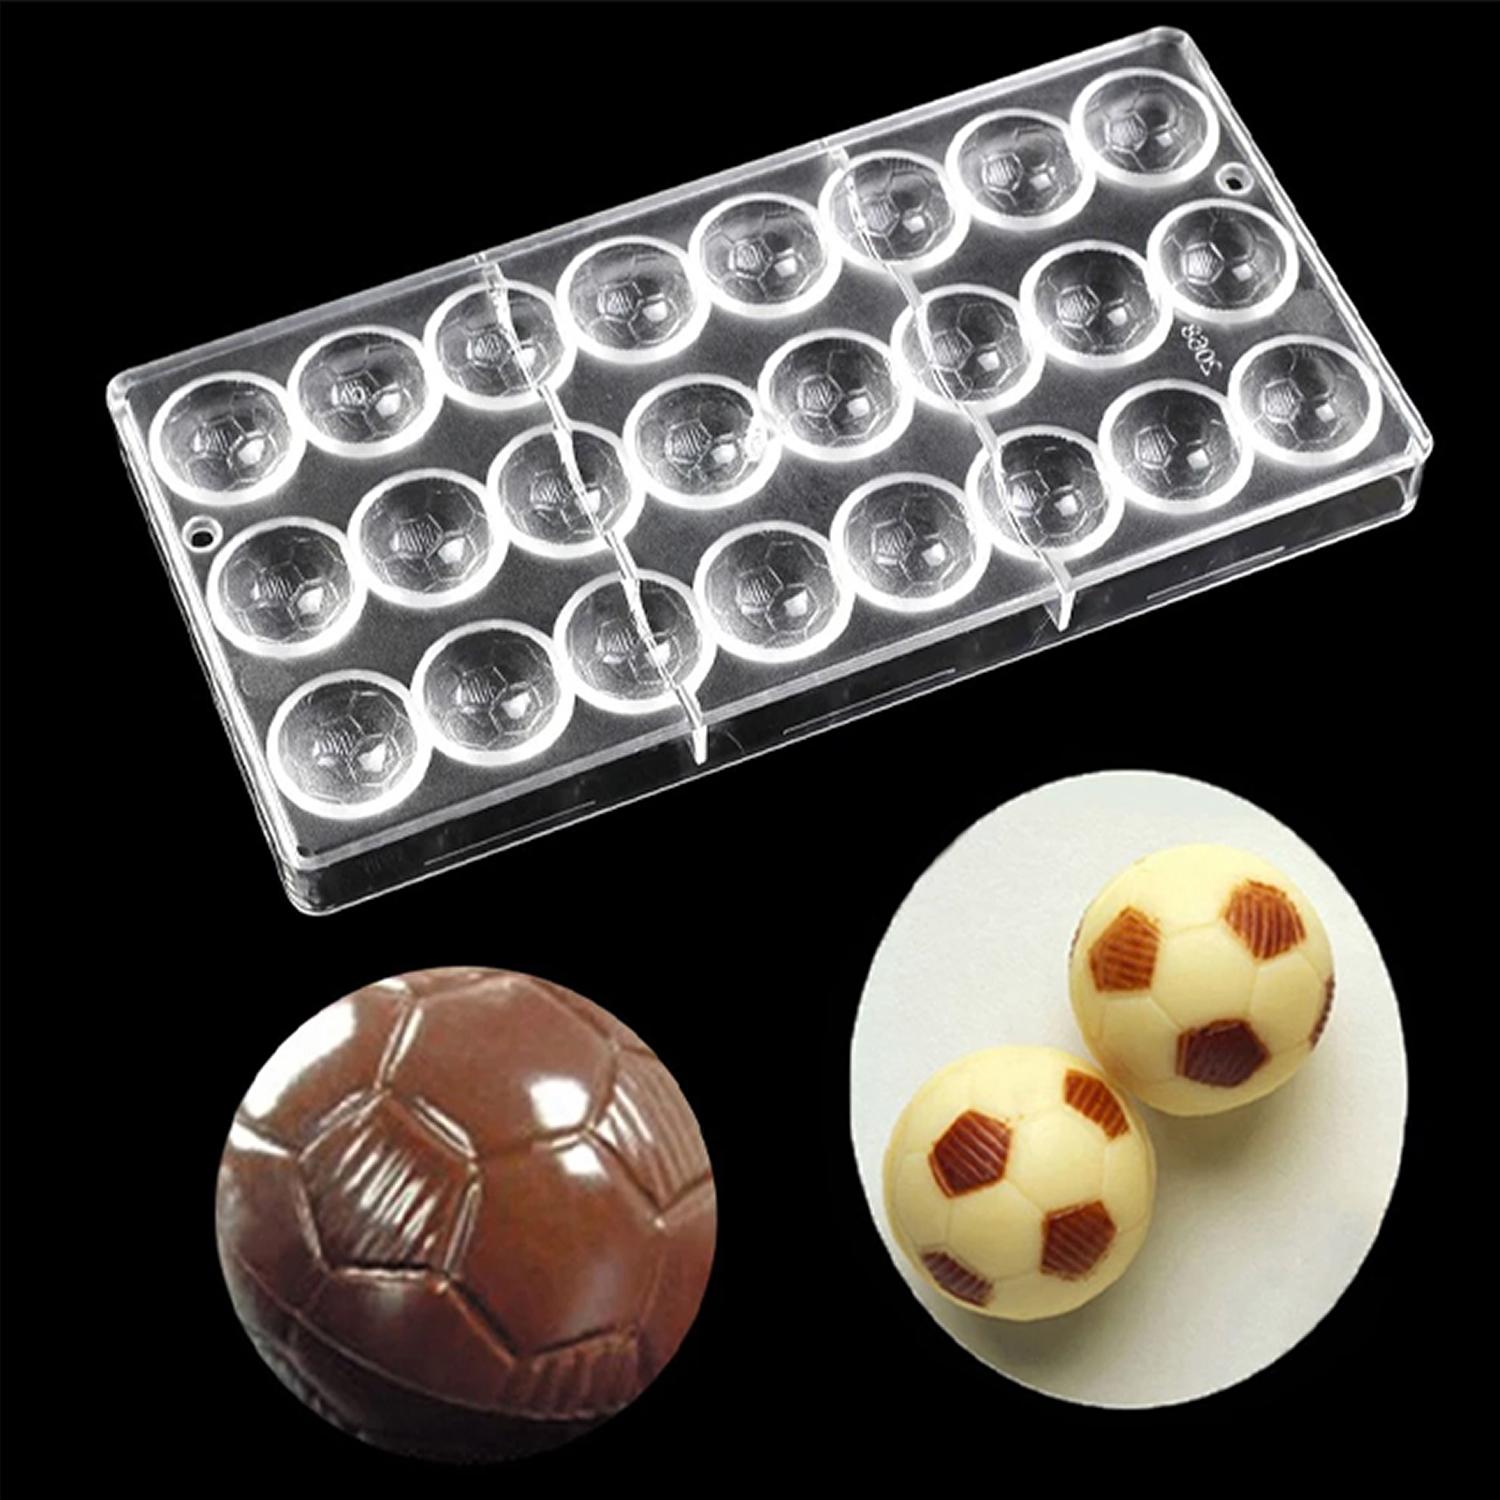 PCM0009 FOOTBALL SHAPED PLASTIC CANDY CHOCOLATE MOLD